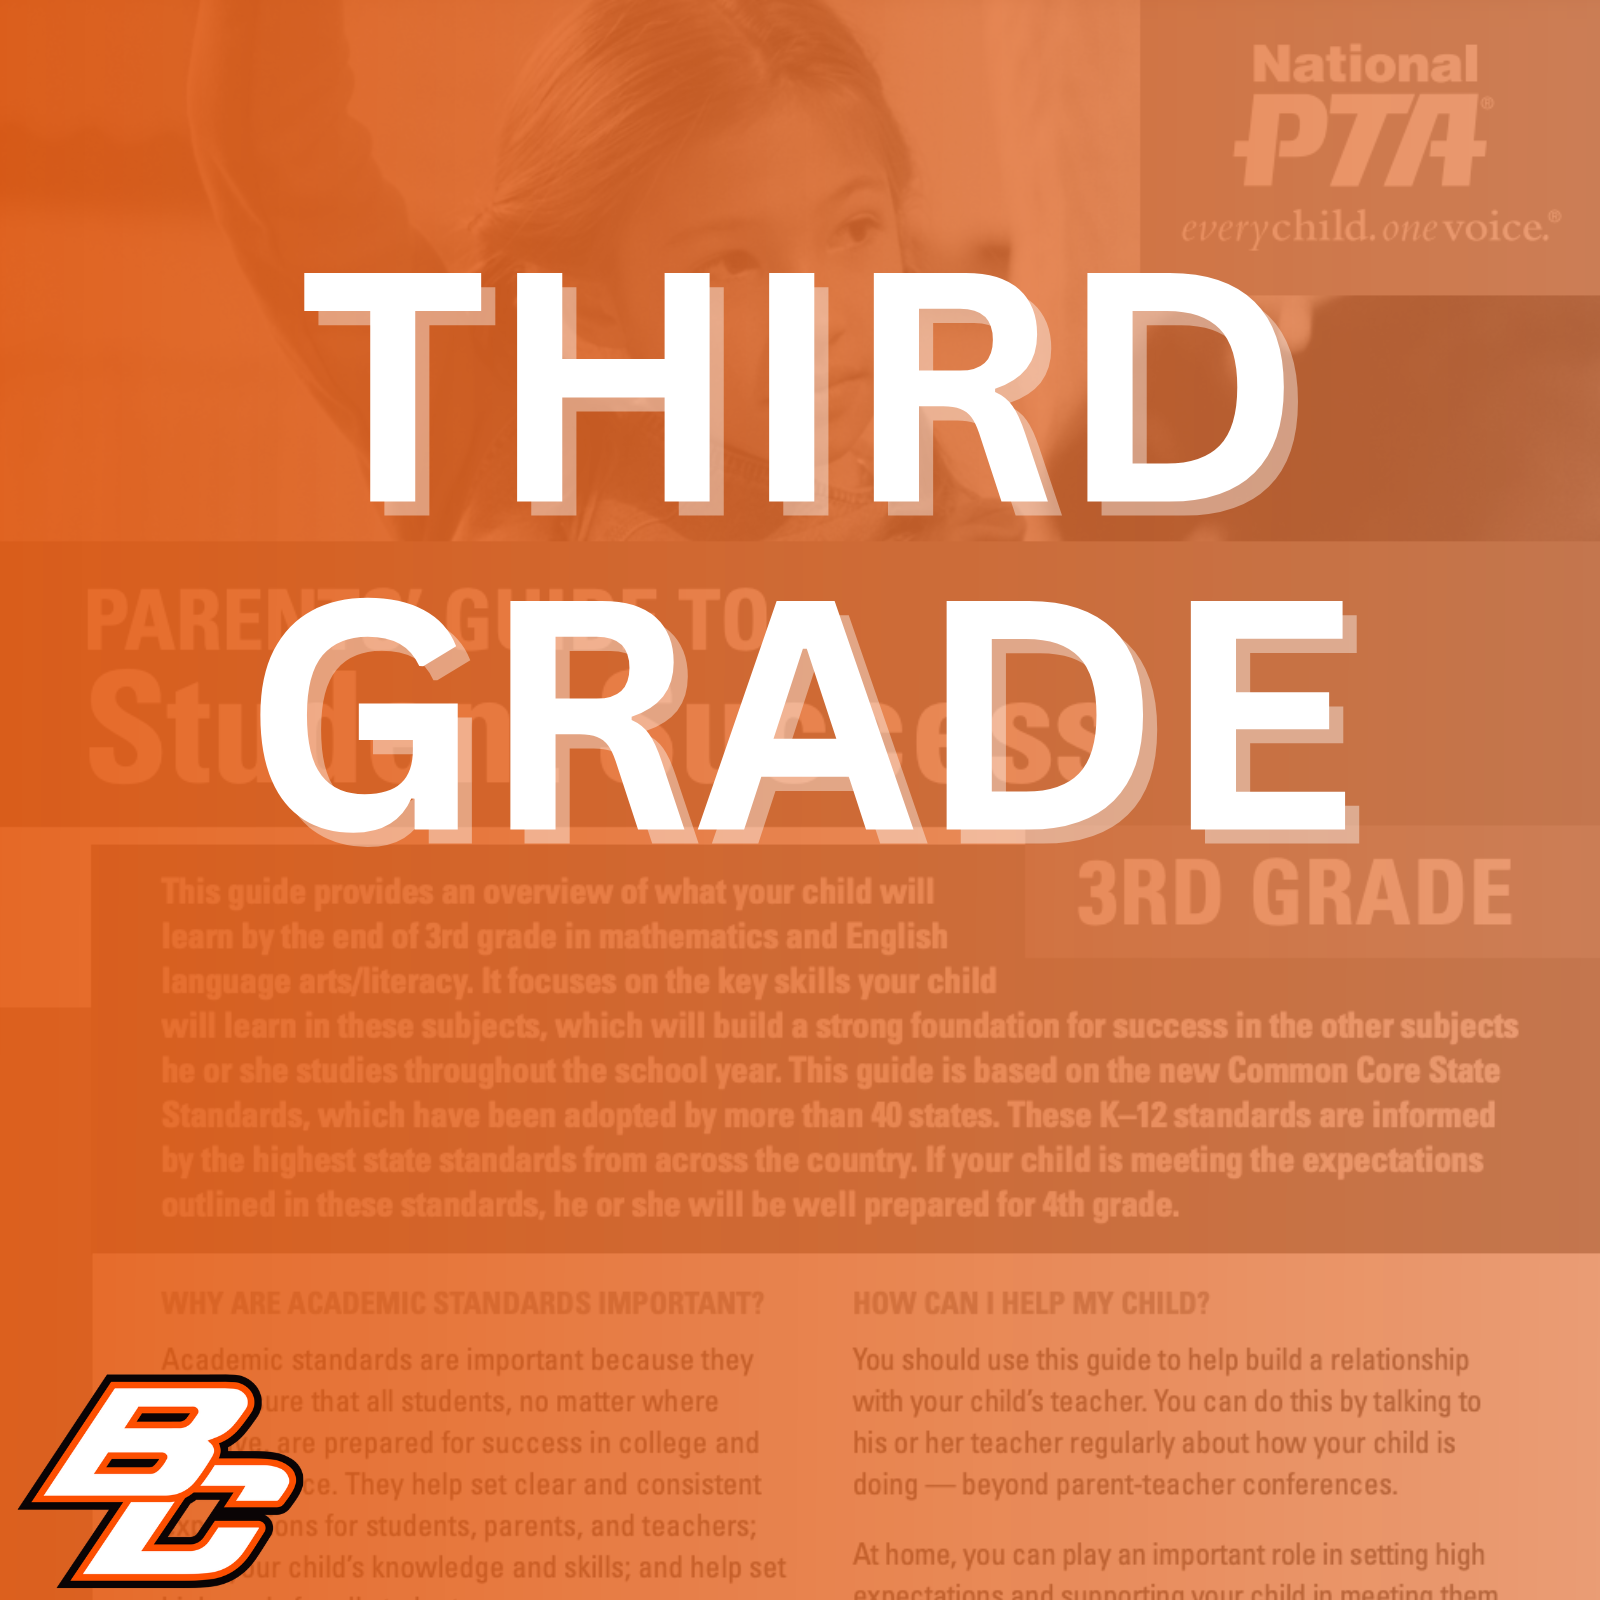 Parent’s Guide to Student Success for 3rd grade: This guide provides an overview of what your child will learn by the end of 3rd grade in mathematics and English language arts/literacy. It focuses on the key skills your child will learn in these subjects, which will build a strong foundation for success in the other subjects he or she studies throughout the school year. This guide is based on the new Common Core State Standards, which have been adopted by more than 40 states. These K-12 standards are informed by the highest state standards from across the country. If your child is meeting the expectations outlined in these standards, he or she will be well prepared for 4th grade.  Why are academic standards important? Academic standards are important because they help ensure that all students, no matter where they live, are prepared for success in college and the workforce. They help set clear and consistent expectations for students, parents, and teachers; build your child's knowledge and skills; and help set high goals for all students.  Of course, high standards are not the only thing needed for our children's success. But standards provide an important first step - a clear roadmap for learning for teachers, parents, and students. Having clearly defined goals helps families and teachers work together to ensure that students succeed. Standards help parents and teachers know when students need extra assistance or when they need to be challenged even more. They also will help your child develop critical thinking skills that will prepare him or her for college and career.  How can I help my child? You should use this guide to help build a relationship with your child's teacher. You can do this by talking to his or her teacher regularly about how your child is doing - beyond parent-teacher conferences.  At home, you can play an important role in setting high expectations and supporting your child in meeting them. If your child needs a little extra help or wants to learn more about a subject, work with his or her teacher to identify opportunities for tutoring, to get involved in clubs after school, or to find other resources.  This guide includes: An overview of some of the key things your child will learn in English/literacy and math in 3rd grade, ideas for activities to help your child learn at home and topics of discussion for talking to your child's teacher about his or her academic progress.